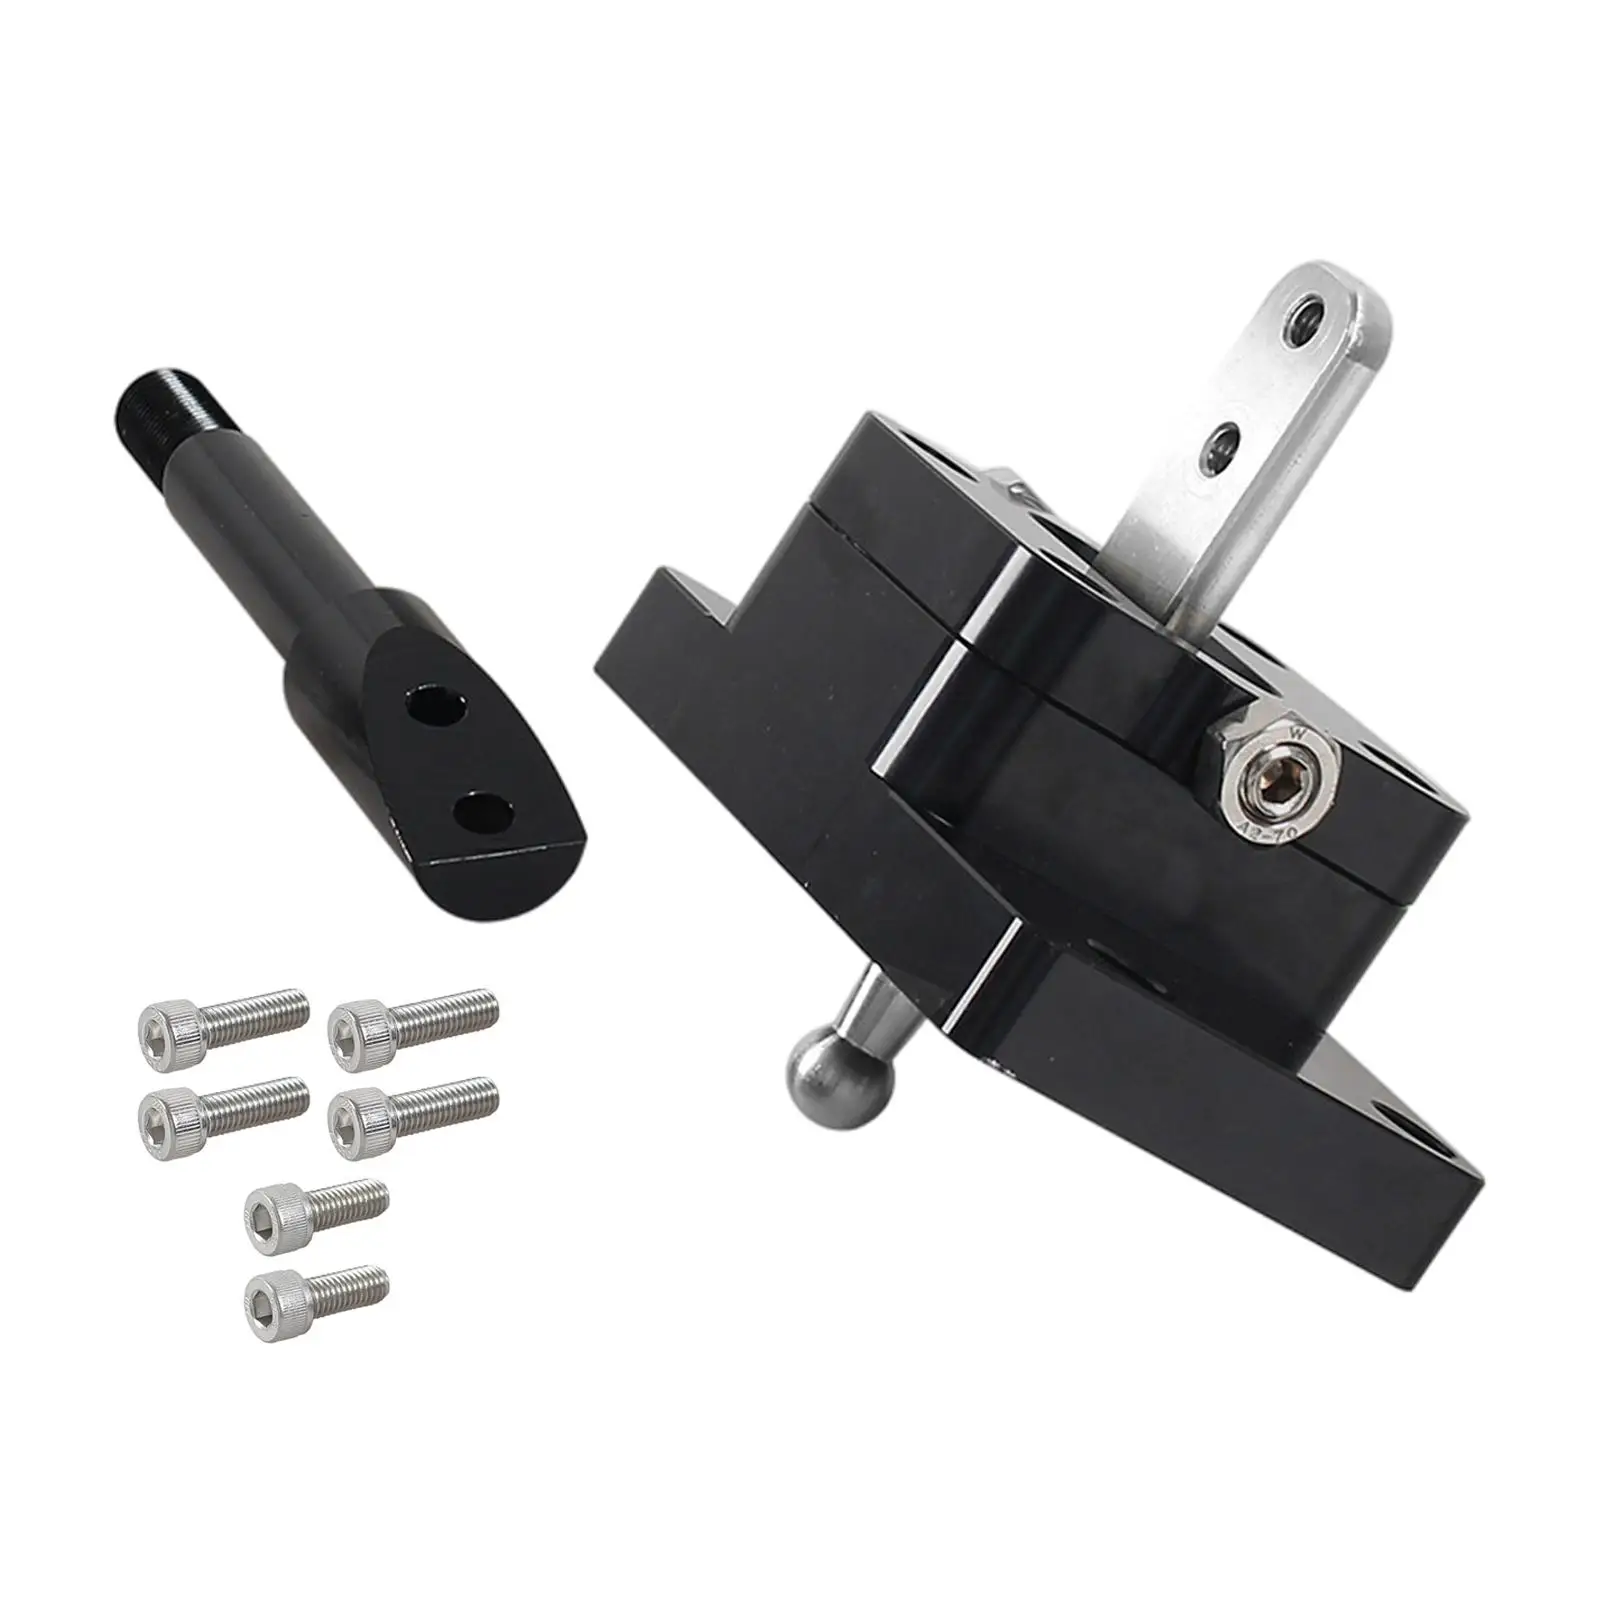 T56 6- Short Throw Shifter for , Made of Aluminium Alloy and Steel